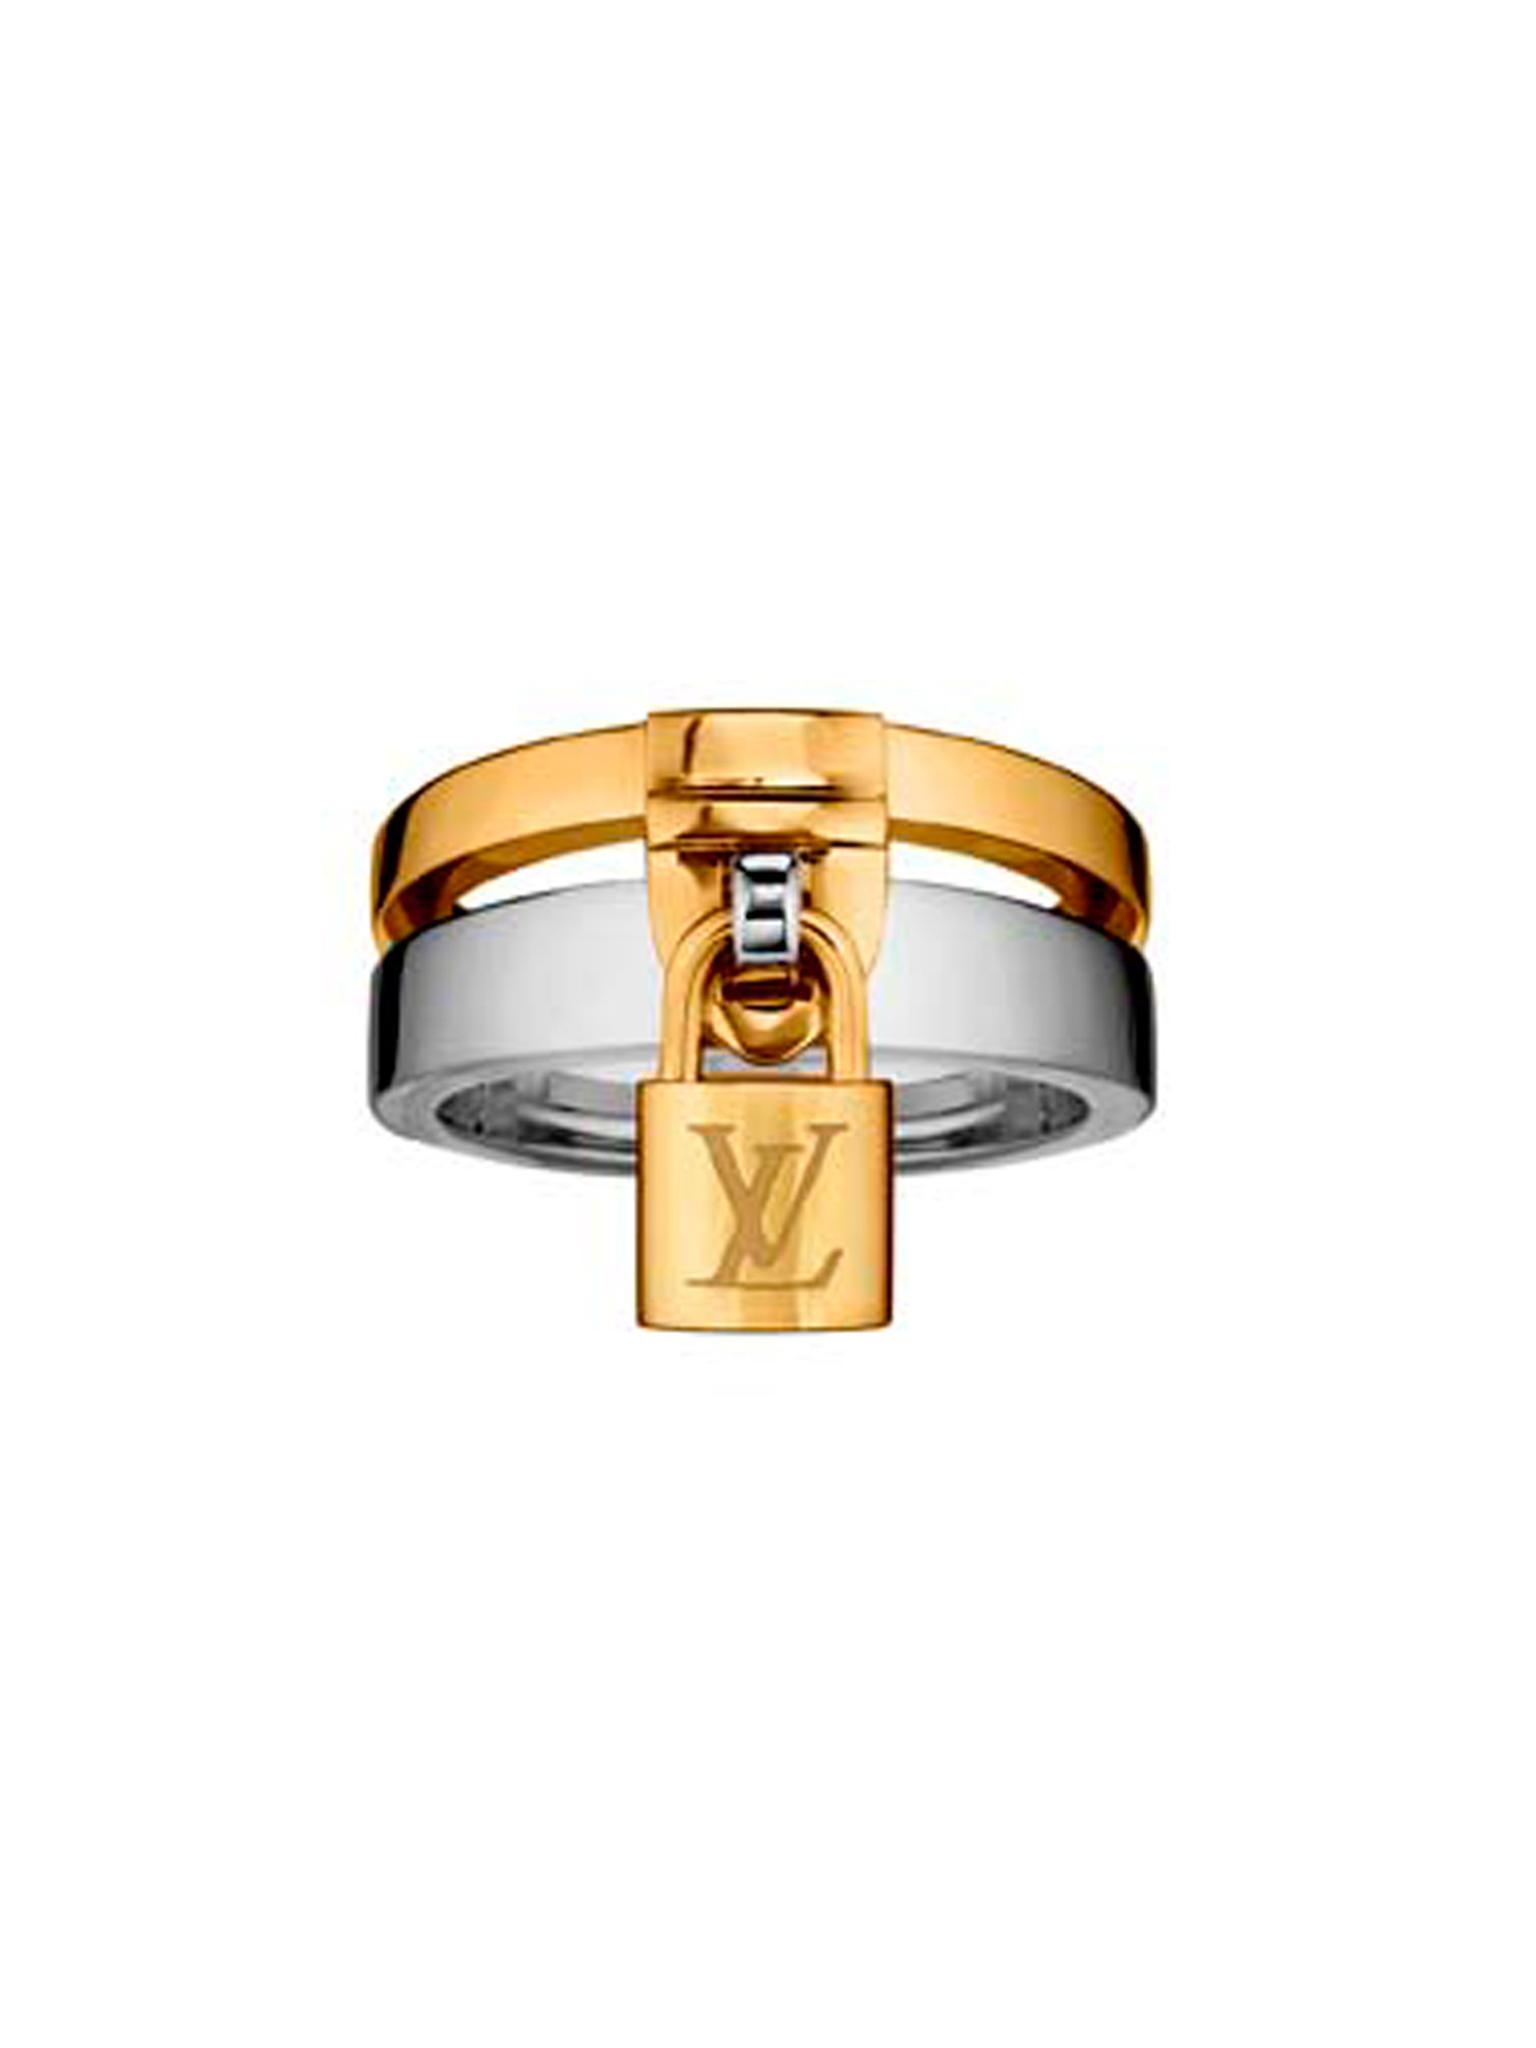 COPY - Authentic discontinued Louis Vuitton 18k white gold Lockit band ring